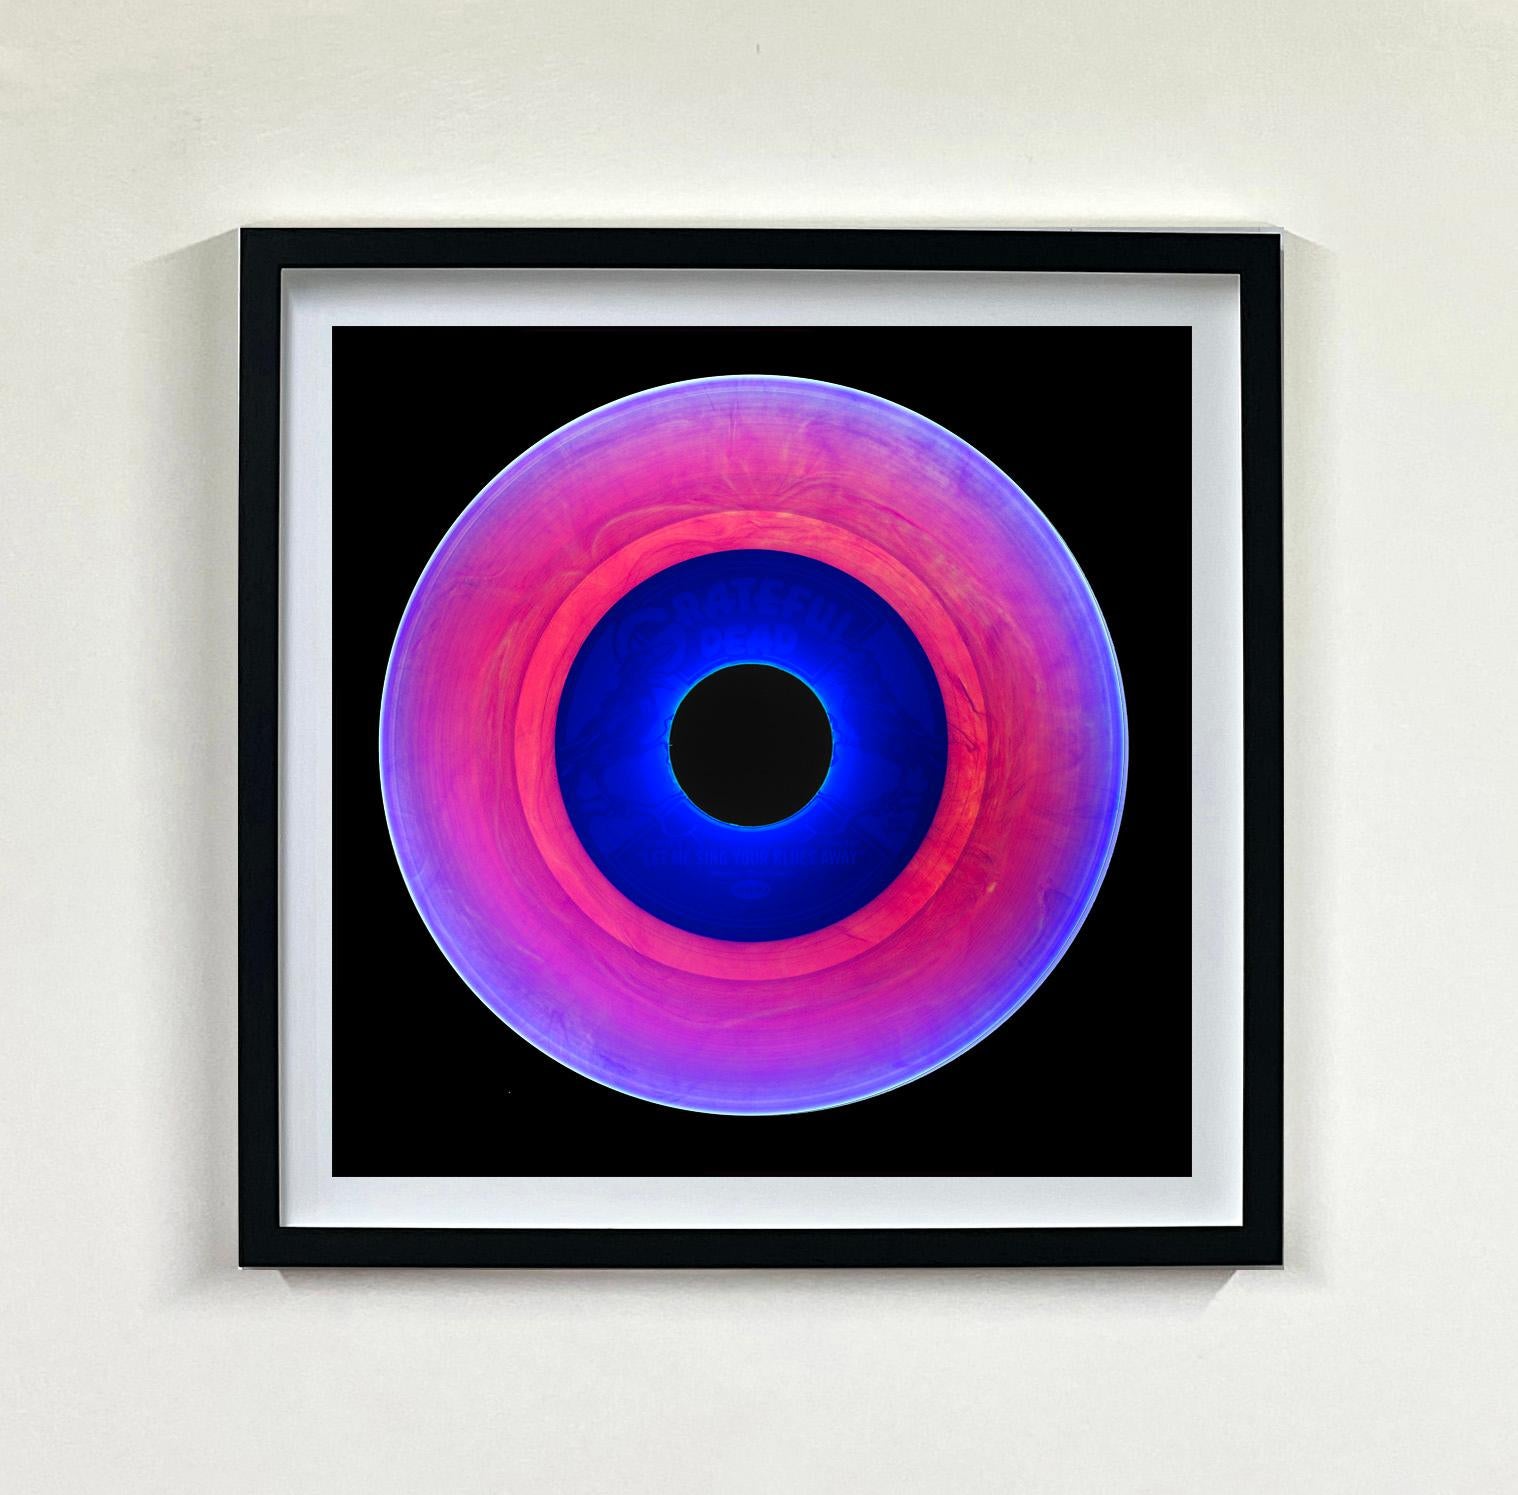 Heidler & Heeps Vinyl Collection Sixteen Piece Multi-color Square Installation.
Acclaimed contemporary photographers, Richard Heeps and Natasha Heidler have collaborated to make this beautifully mesmerising collection. A celebration of the vinyl